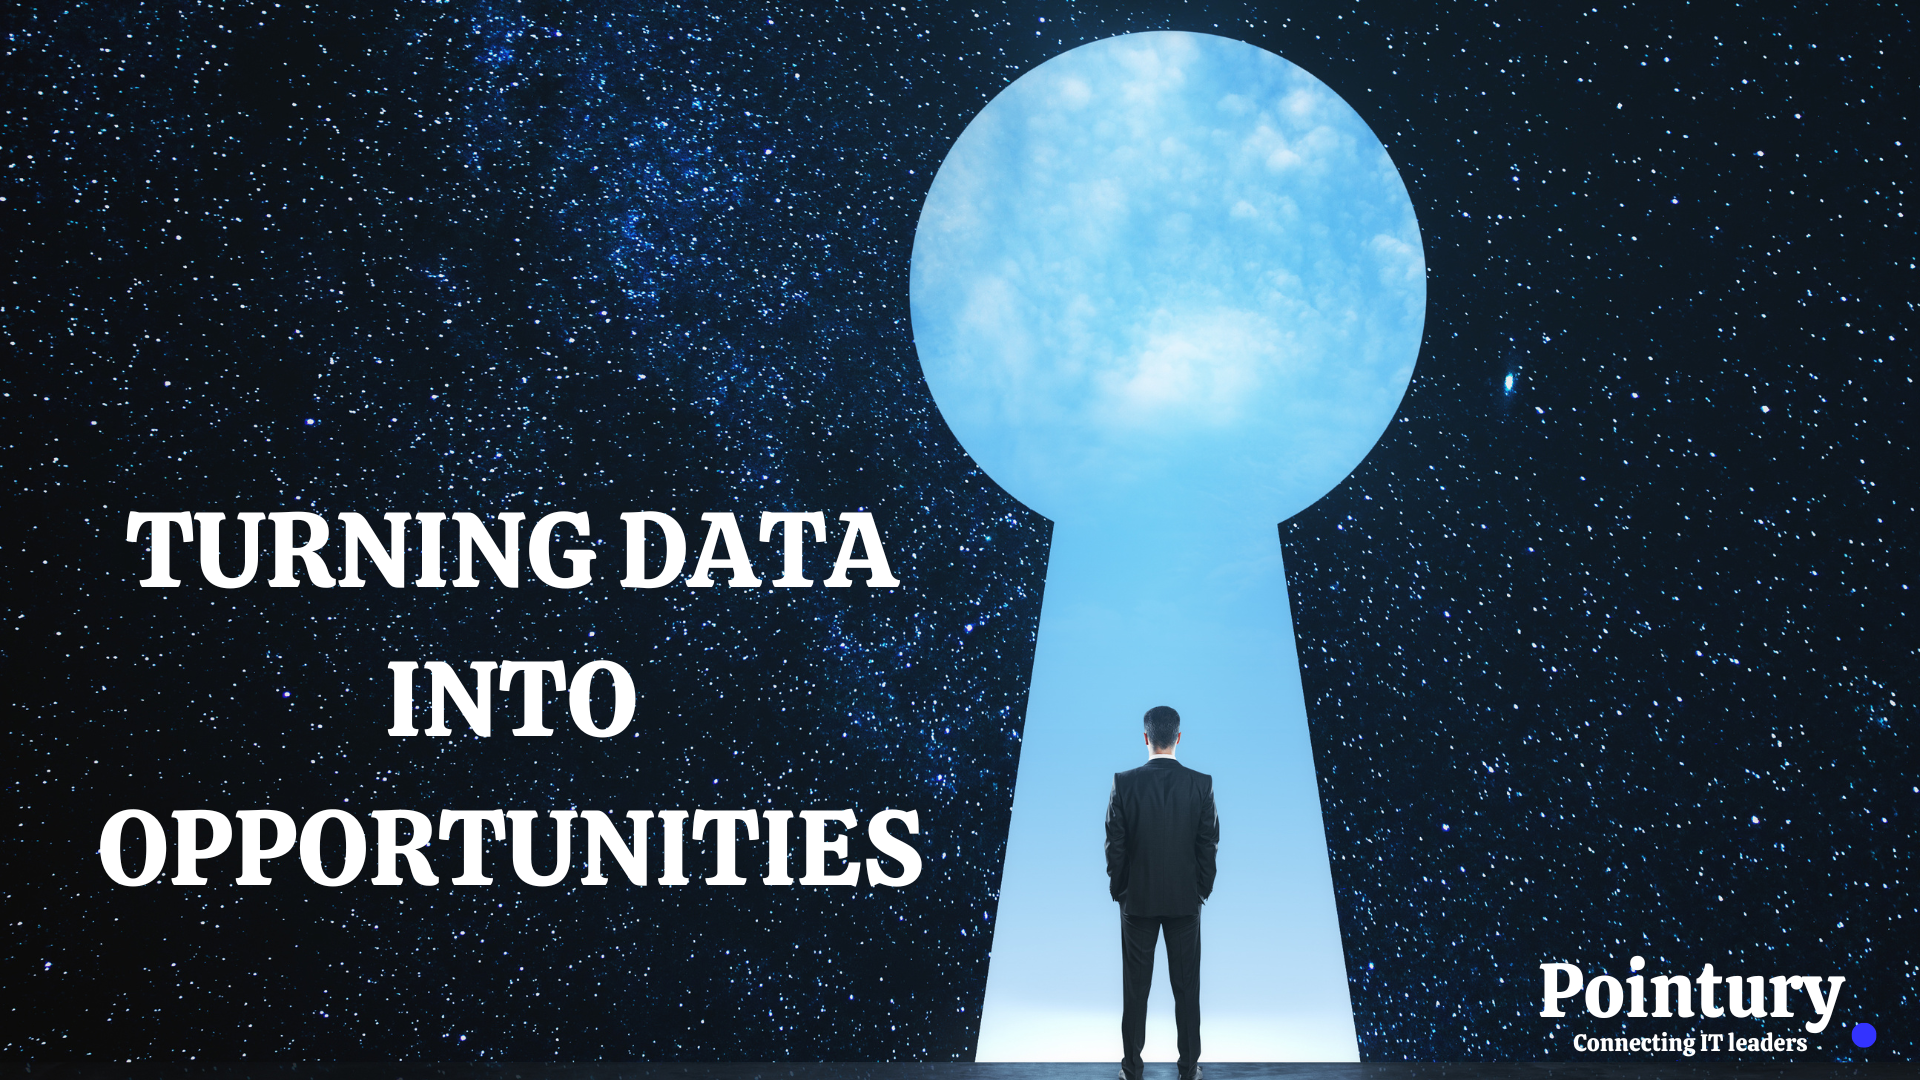 TURNING DATA INTO OPPORTUNITIES